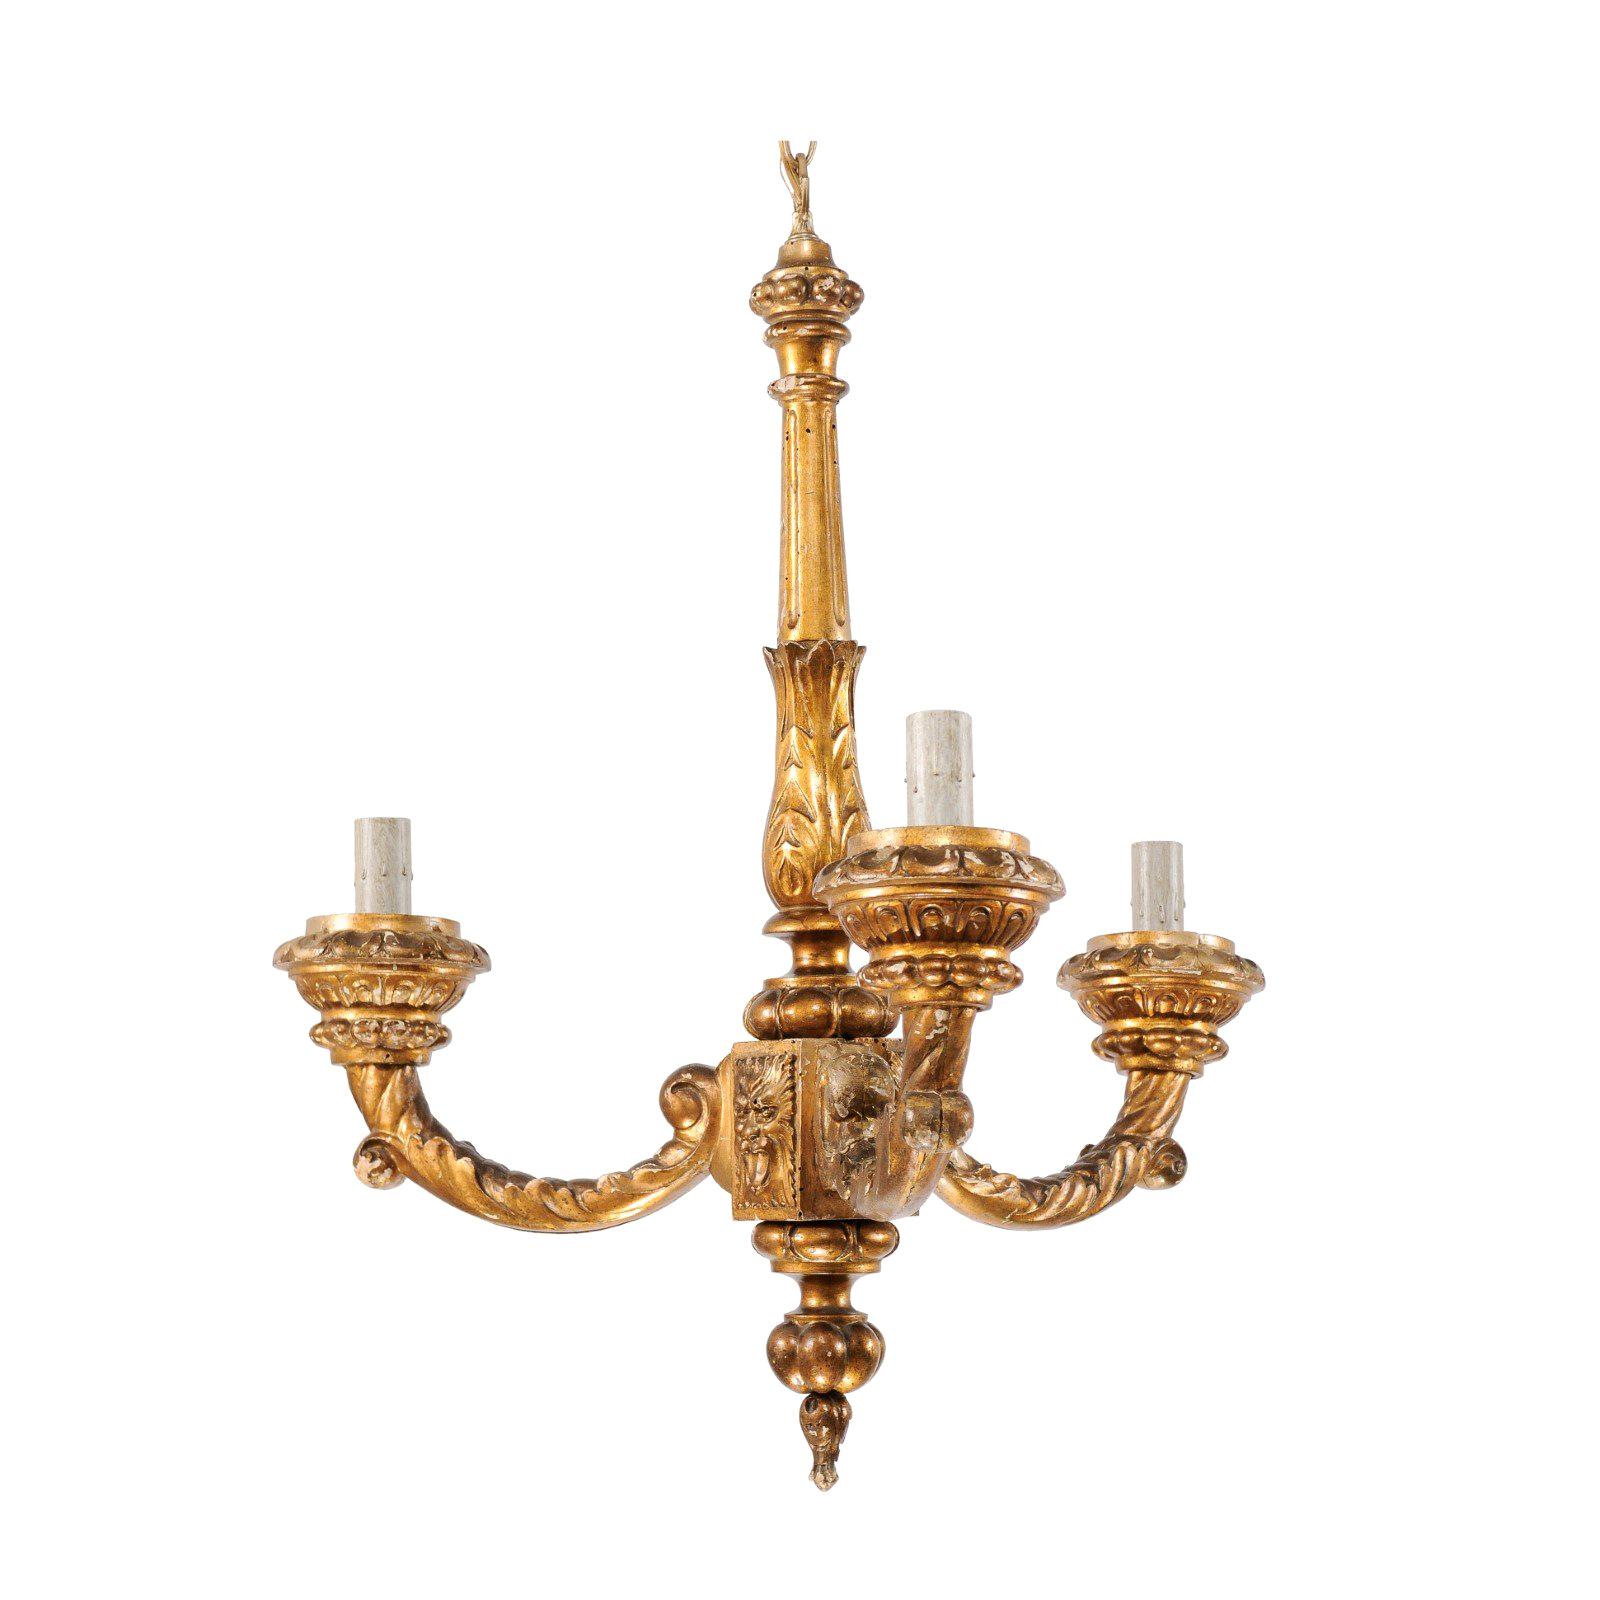 French Three-Light Carved Giltwood Column Chandelier from the Mid-20th Century